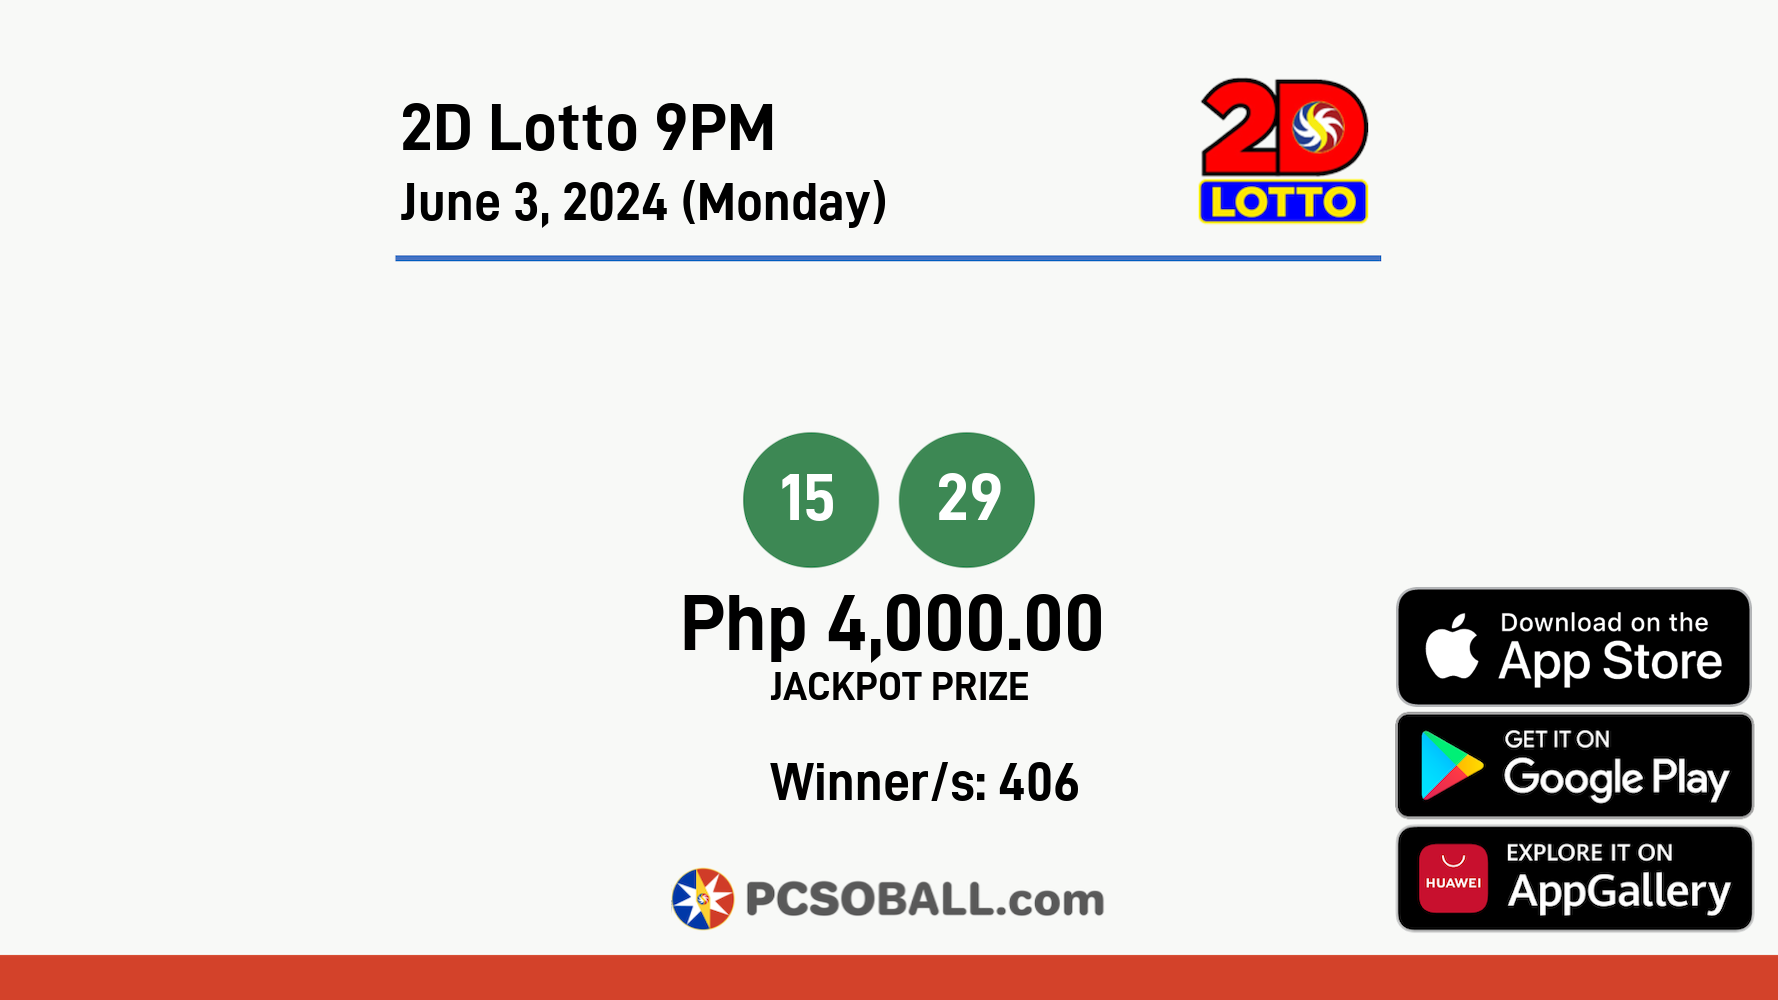 2D Lotto 9PM June 3, 2024 (Monday) Result